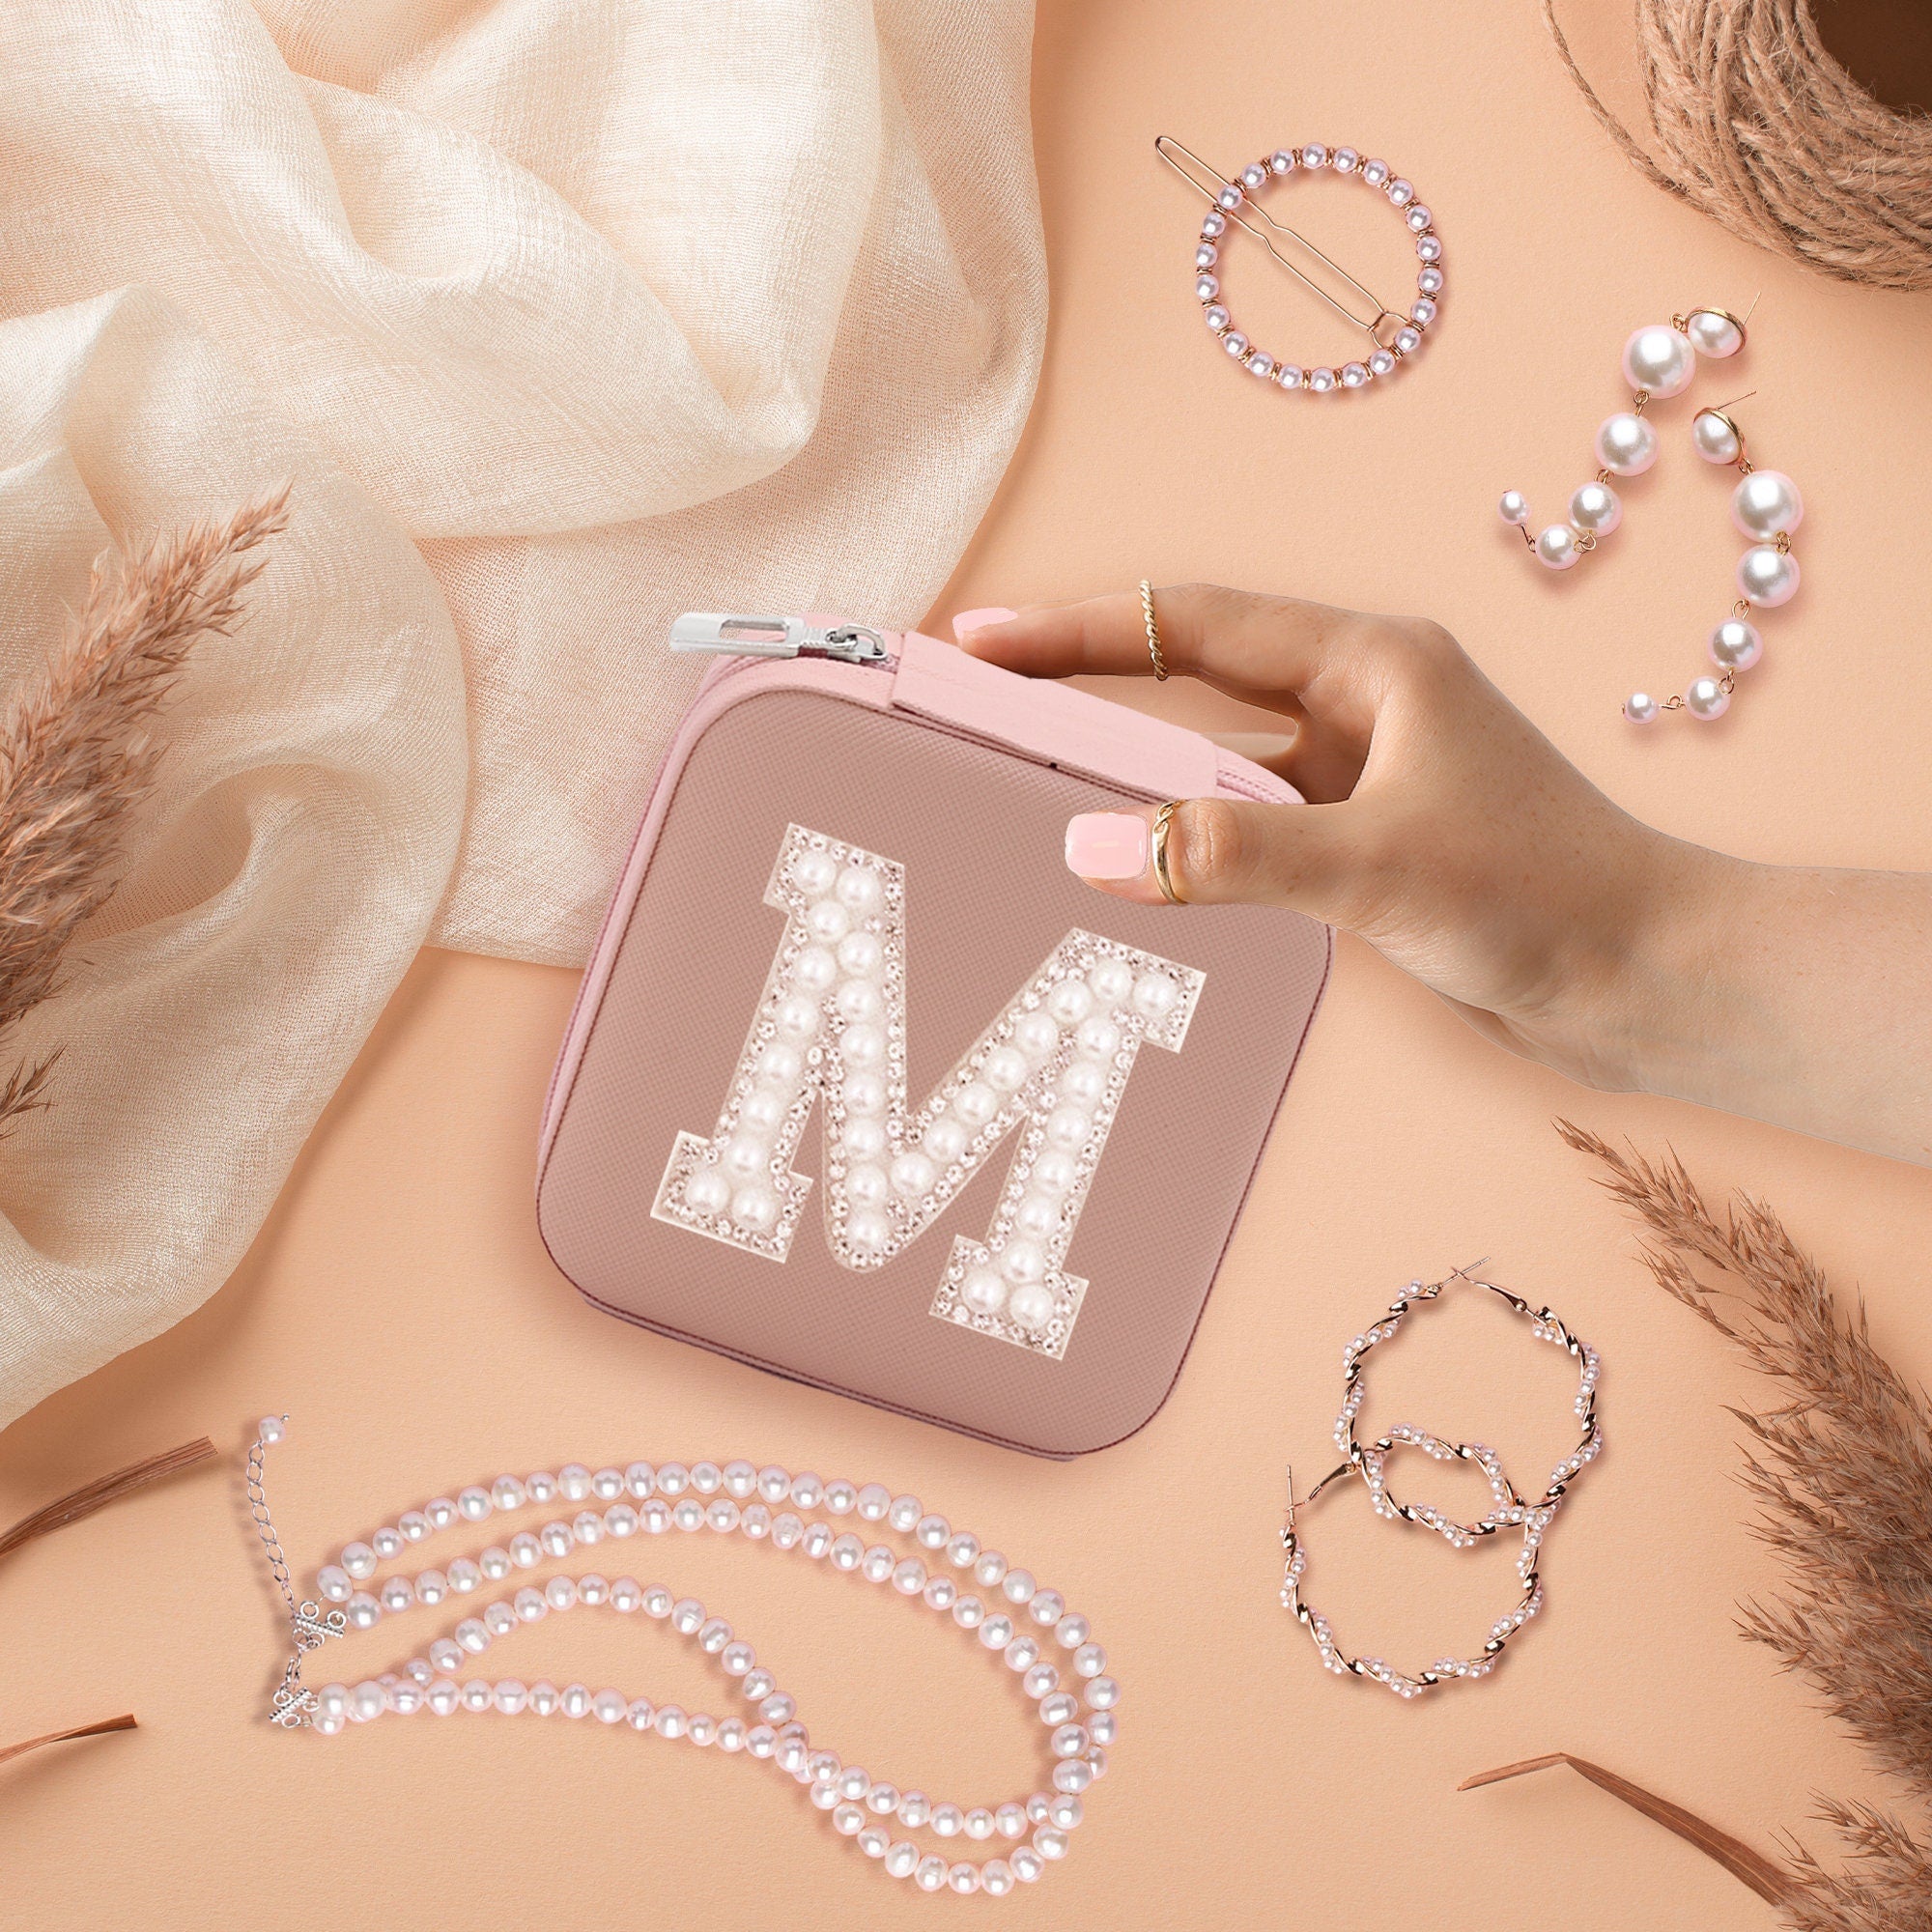 a woman&#39;s hand is holding a pink case with the letter m on it